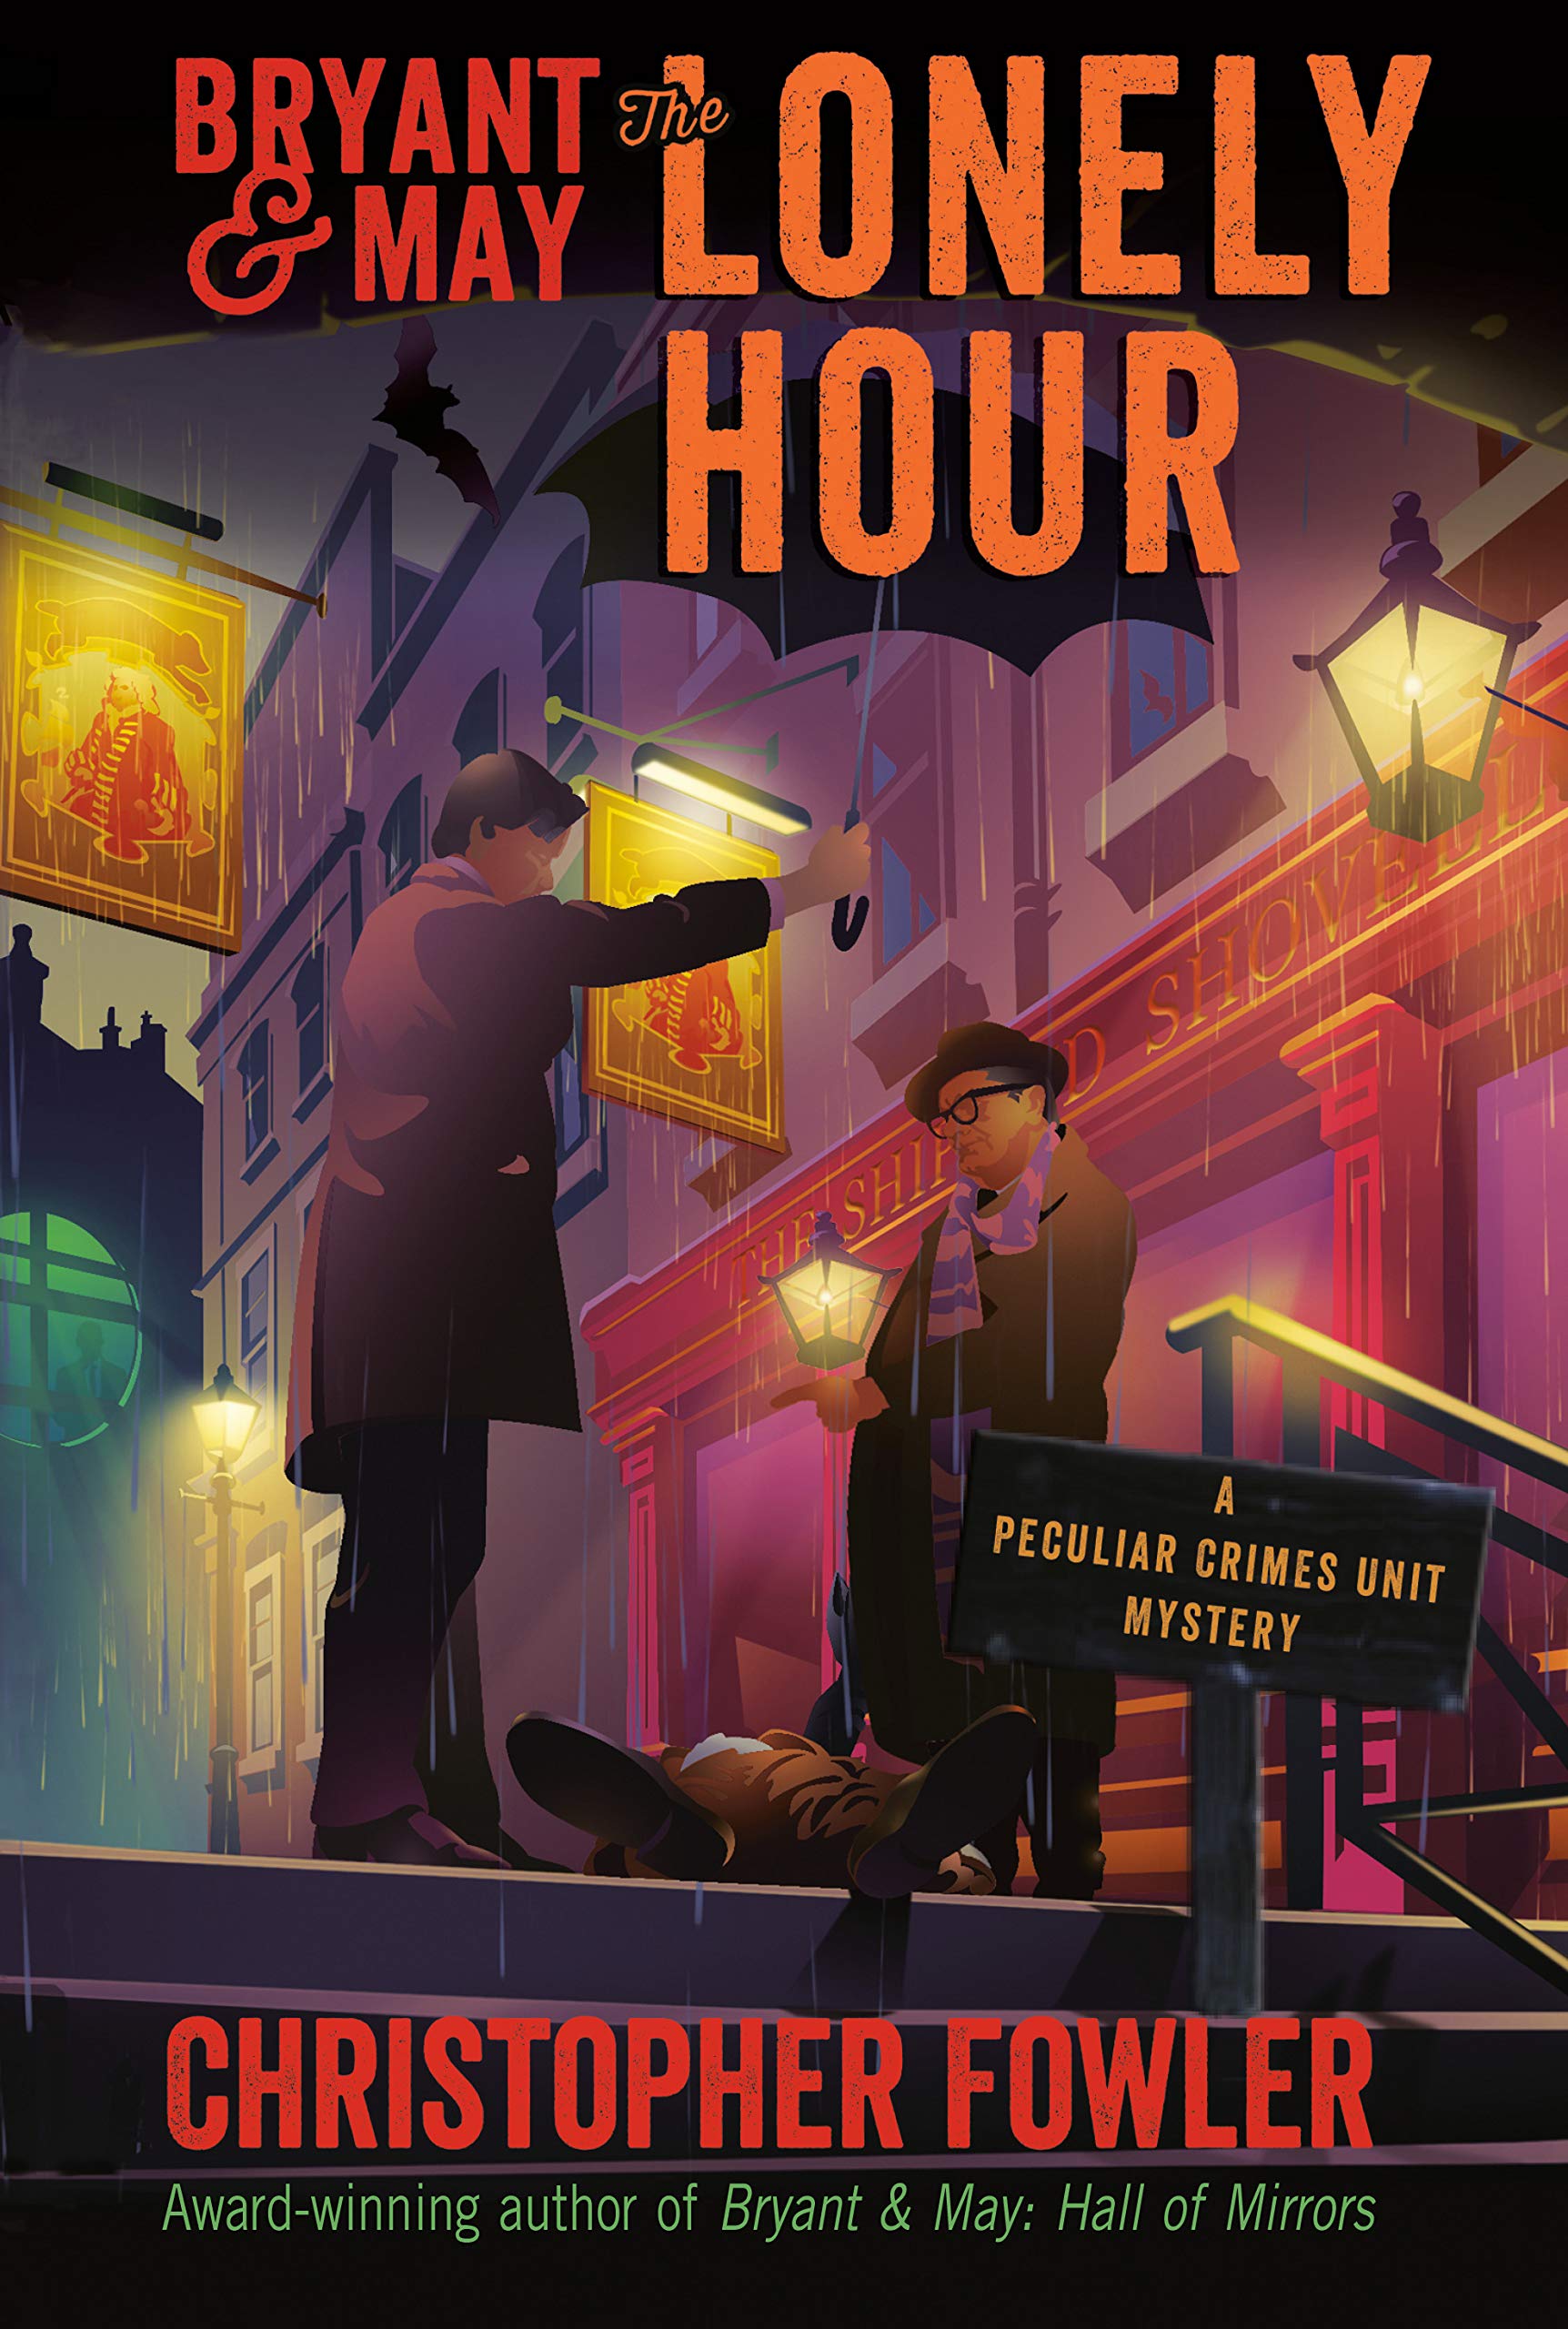 Bryant & May: The Lonely Hour: A Peculiar Crimes Unit Mystery